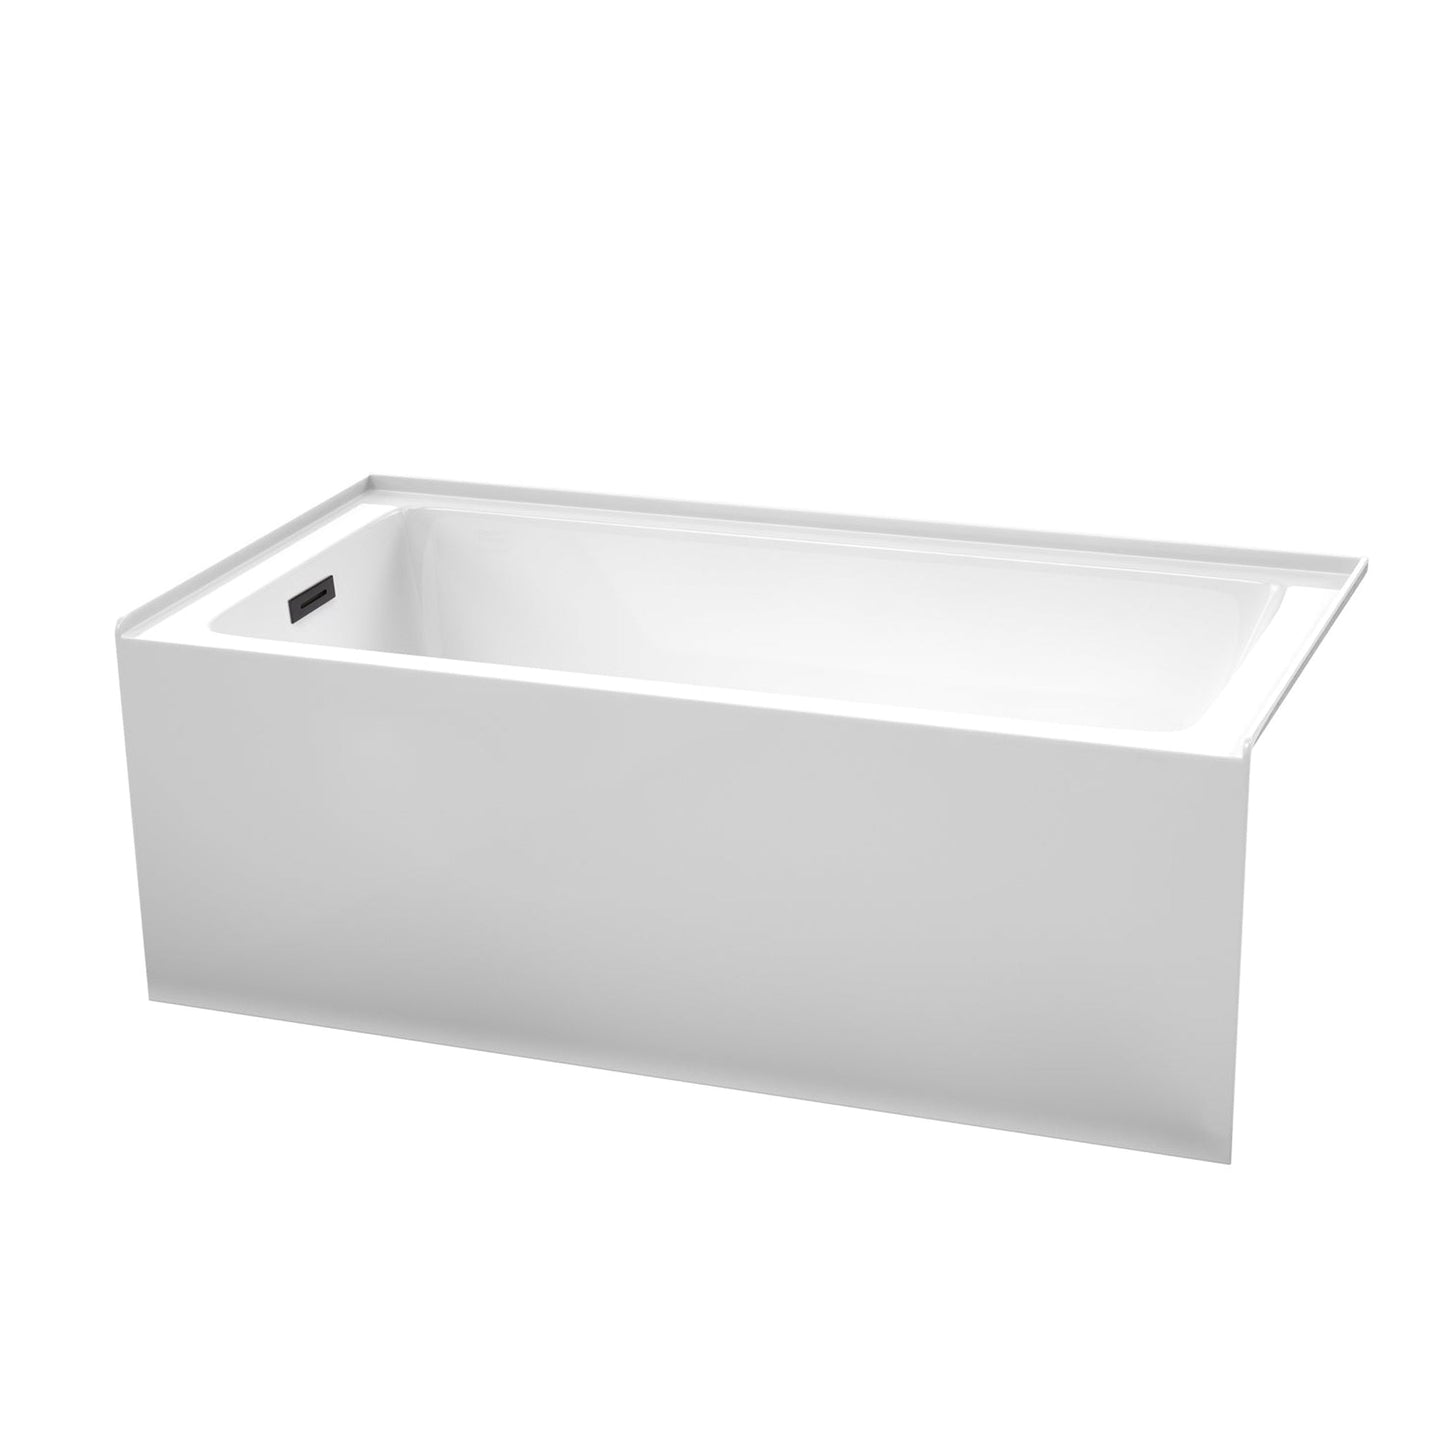 Wyndham Collection Grayley 60" x 30" Alcove Bathtub in White With Left-Hand Drain and Overflow Trim in Matte Black